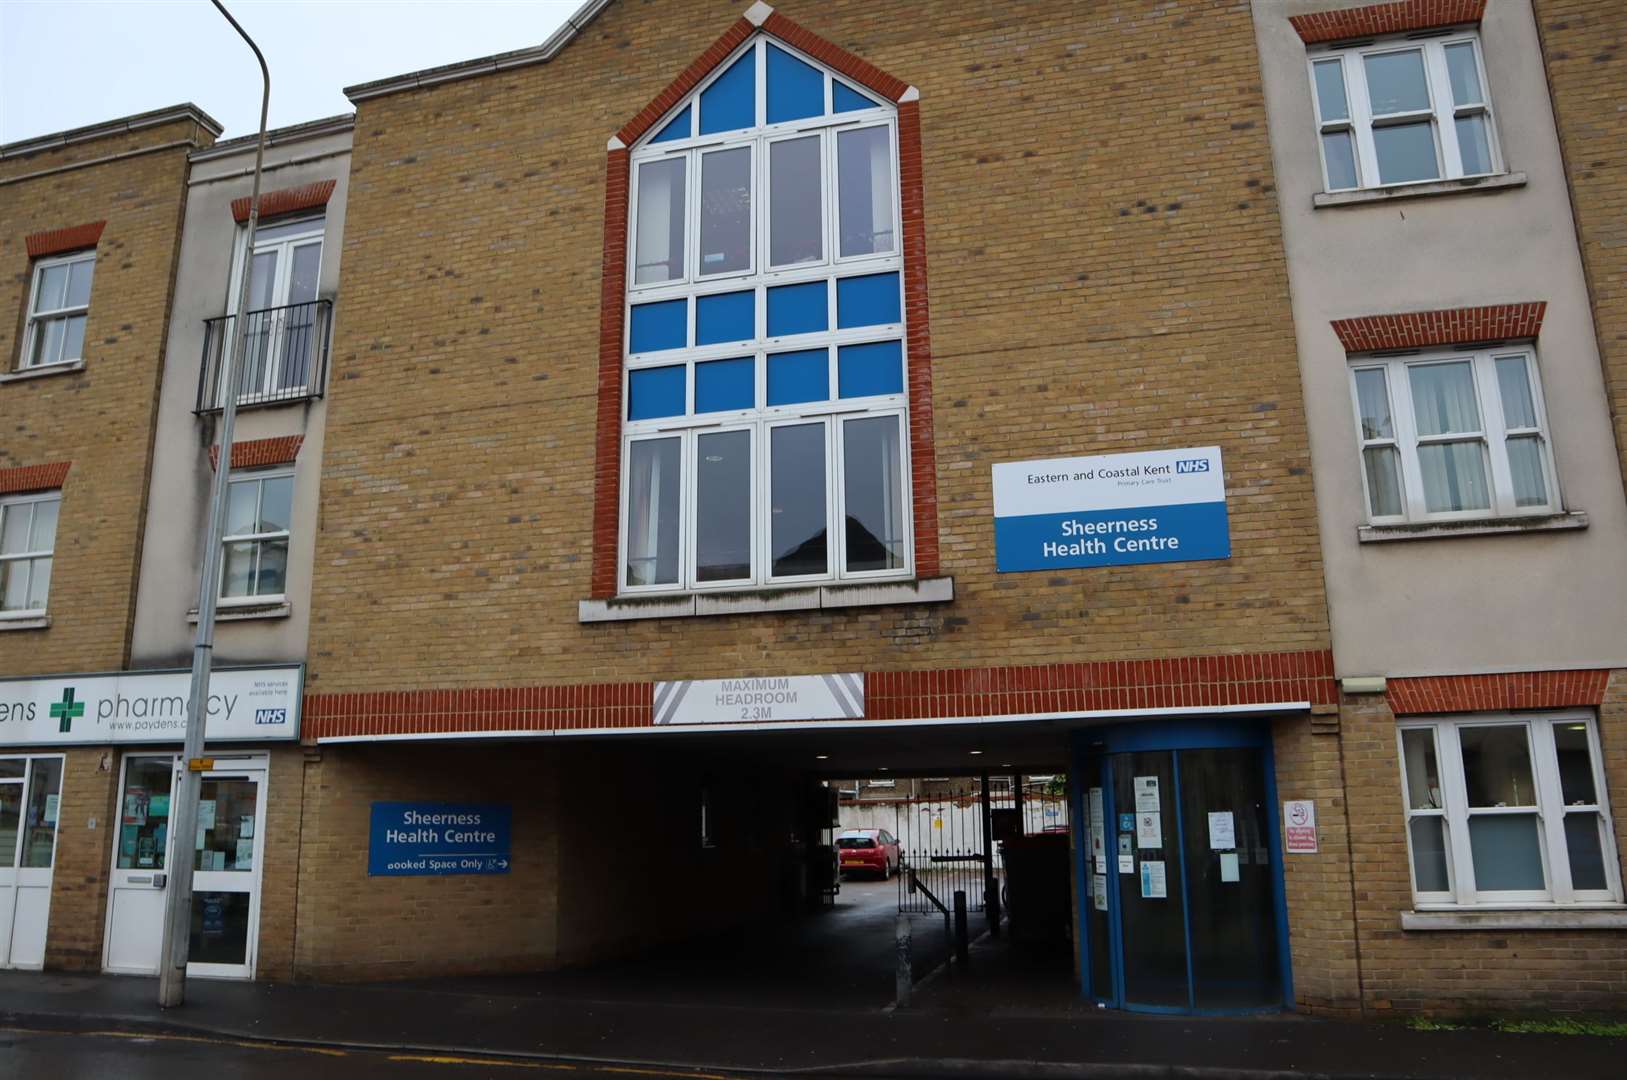 The entrance to the building where Dr Chandran's practice